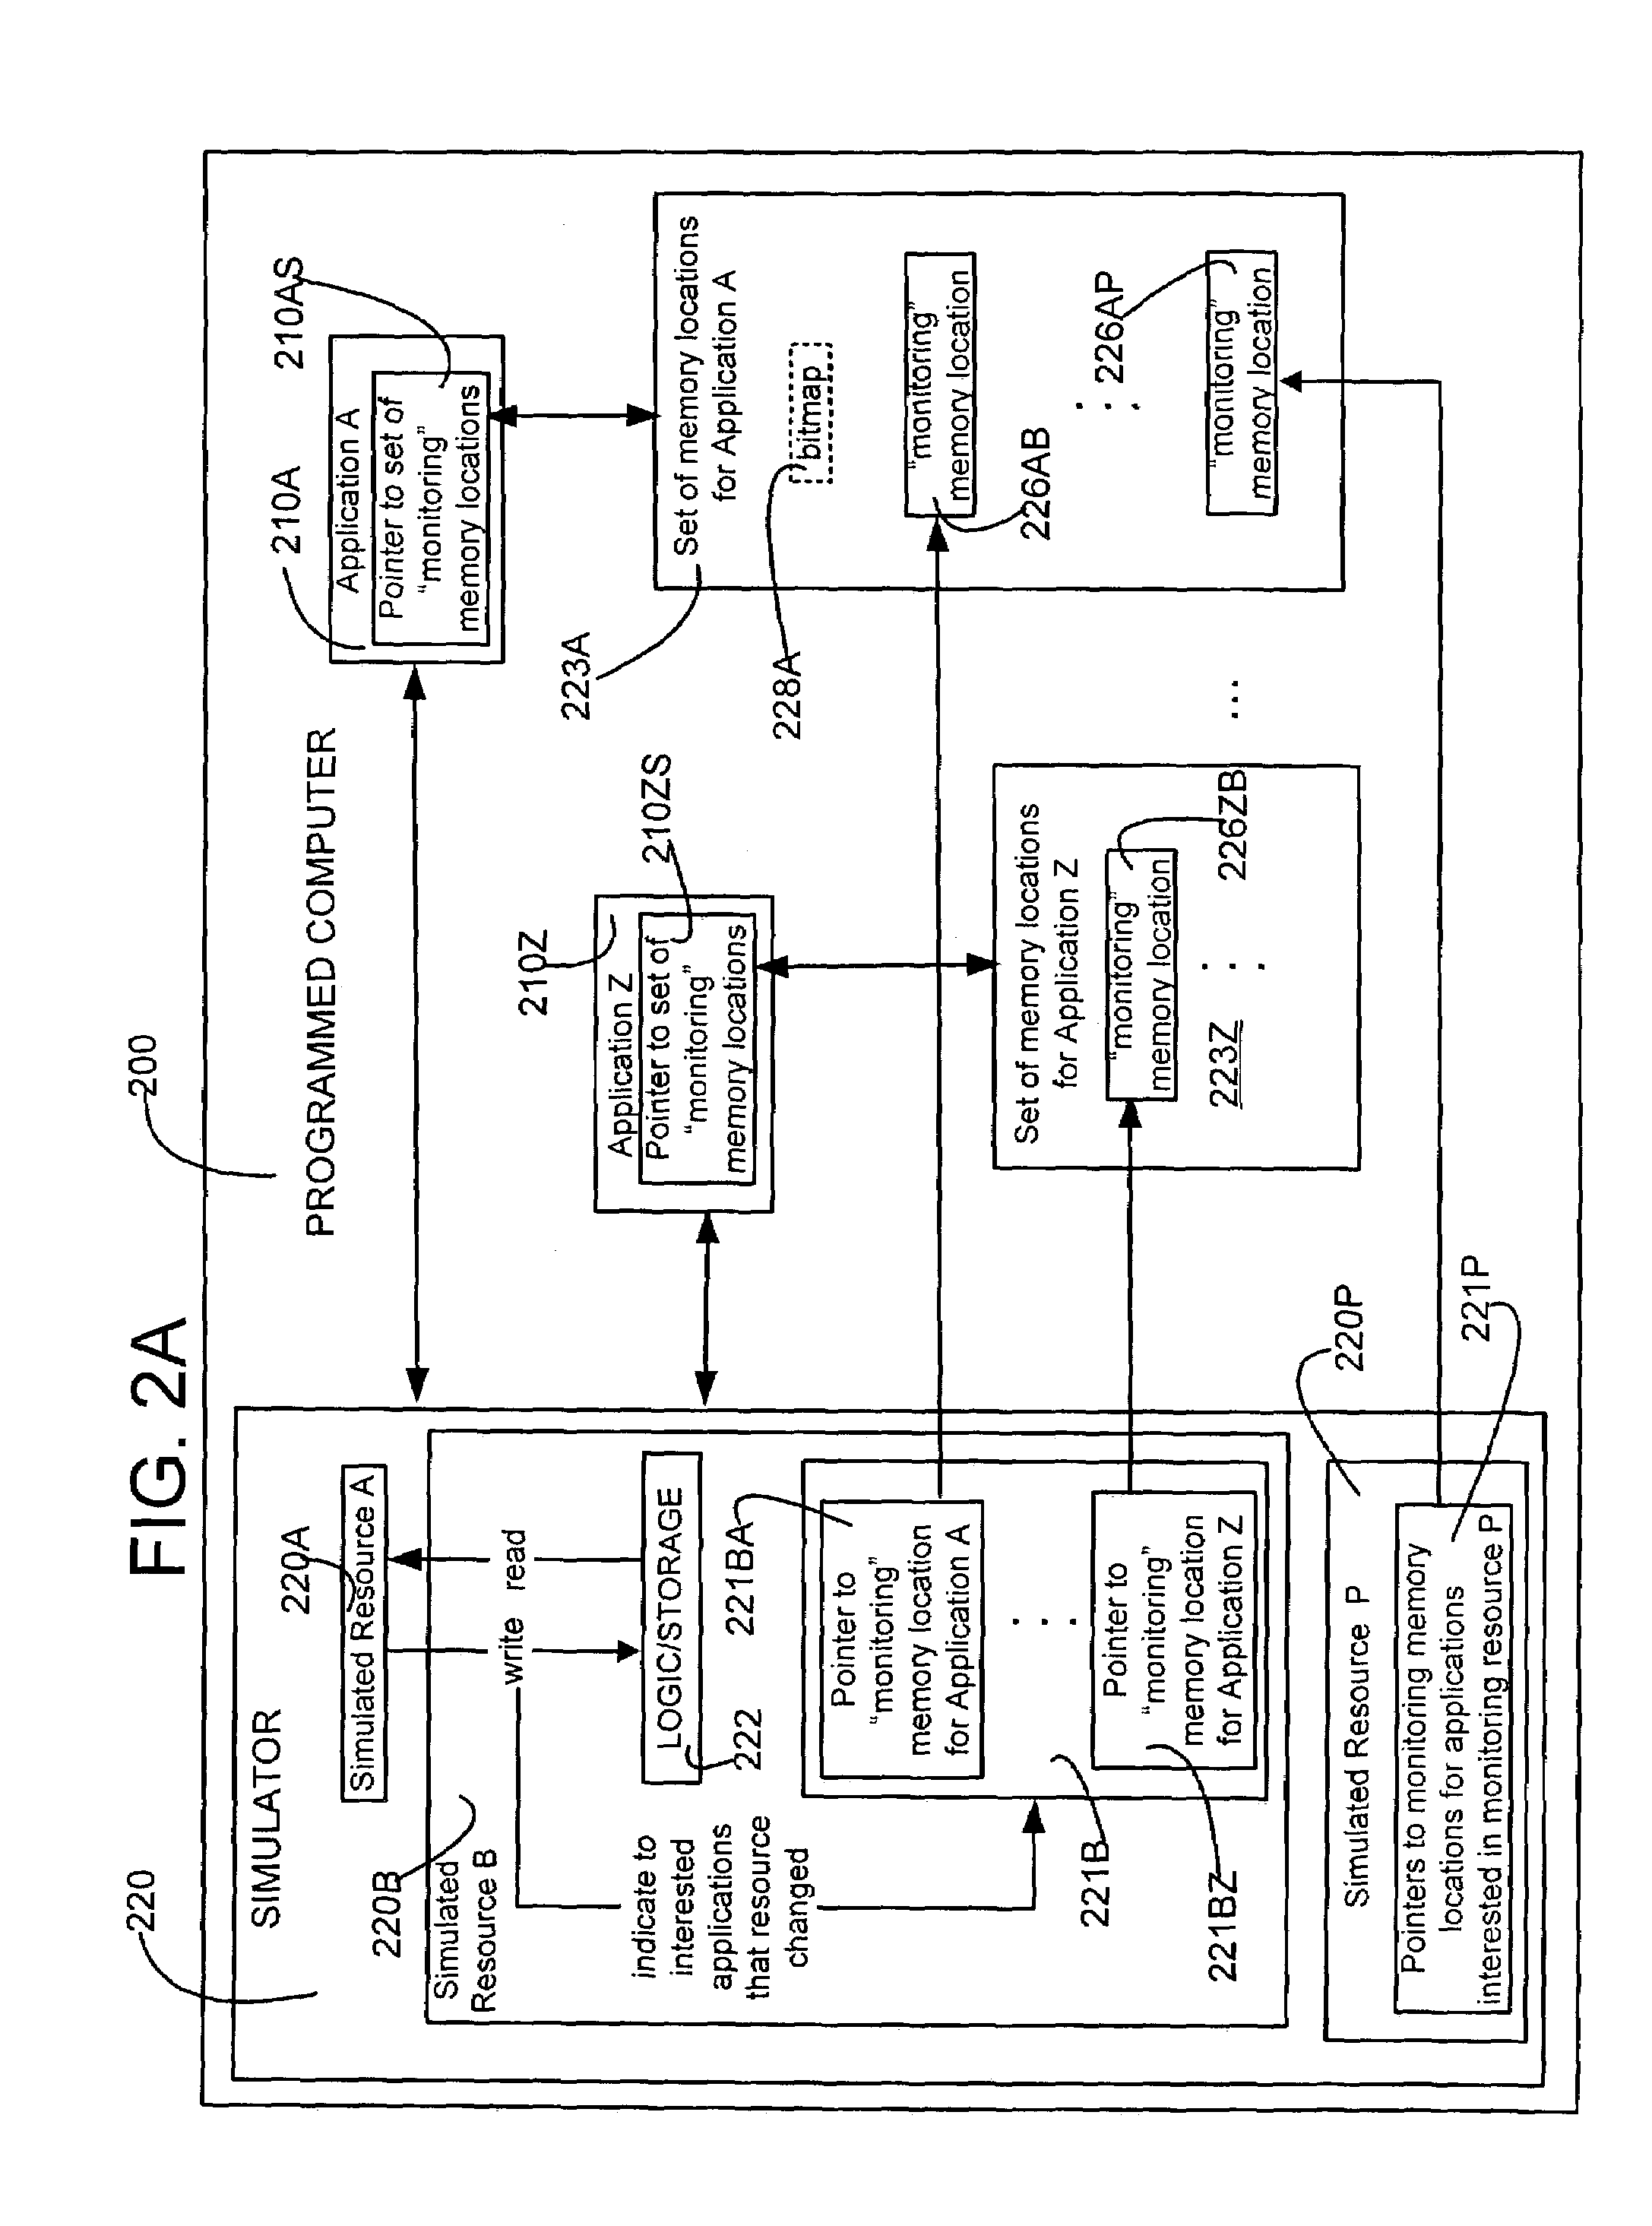 Monitoring of resources that are being modeled by simulation or emulation